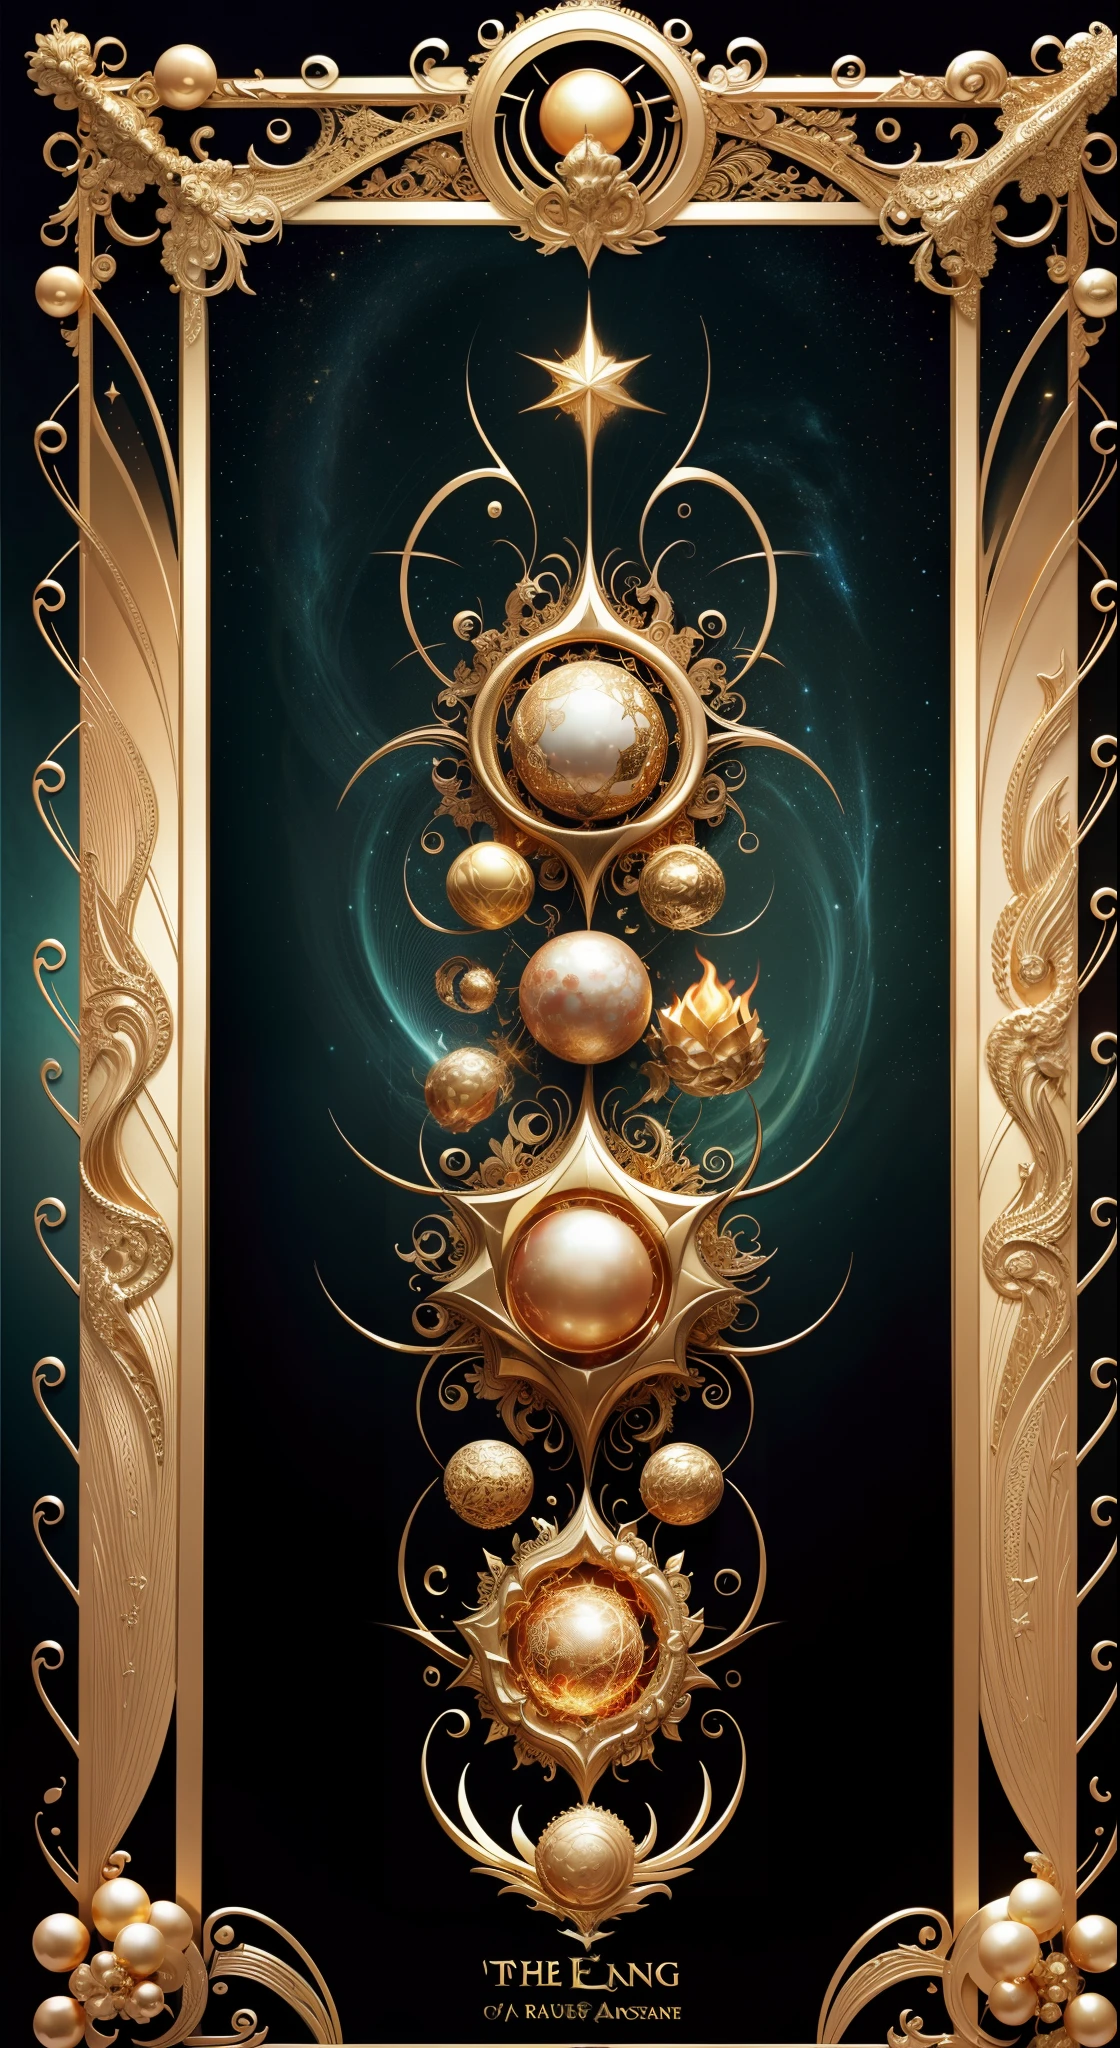 tarot cards，Full tarot border，(The image is surrounded by a tarot card-style border:1.8),The back of the card，hades，Wearing：a black cloak，Giant scythe，Great giants，Roman mythology，8k wallpaper, Ultra-detailed, Beautiful and aesthetically pleasing, tmasterpiece, best qualityer, (s fractal art: 1.3), erupting volcano, extremely detaile, dynamic angle, Cowboy shot, The most beautiful forms of chaos, elegant, Fauvistdesign, vivd colour, romanticism lain, bright, Buble, sbrights, Blood, pearlagma,flame, Libra, skulls, Vintage style，（zentangle，datura，Tangles，entangled）， (s fractal art: 1.3)，holy rays，gold foil，Gold leaf art，glitter drawing，Full tarot border，（Full border 1.5），Fang Yi，（The border is centered at 1.8），(theelementoffire:1.4),Composed of fire elements，Highly realistic,Sci-fi lighting effects,Flame,hoang lap，climaxing，looking down from above，simple backgound：